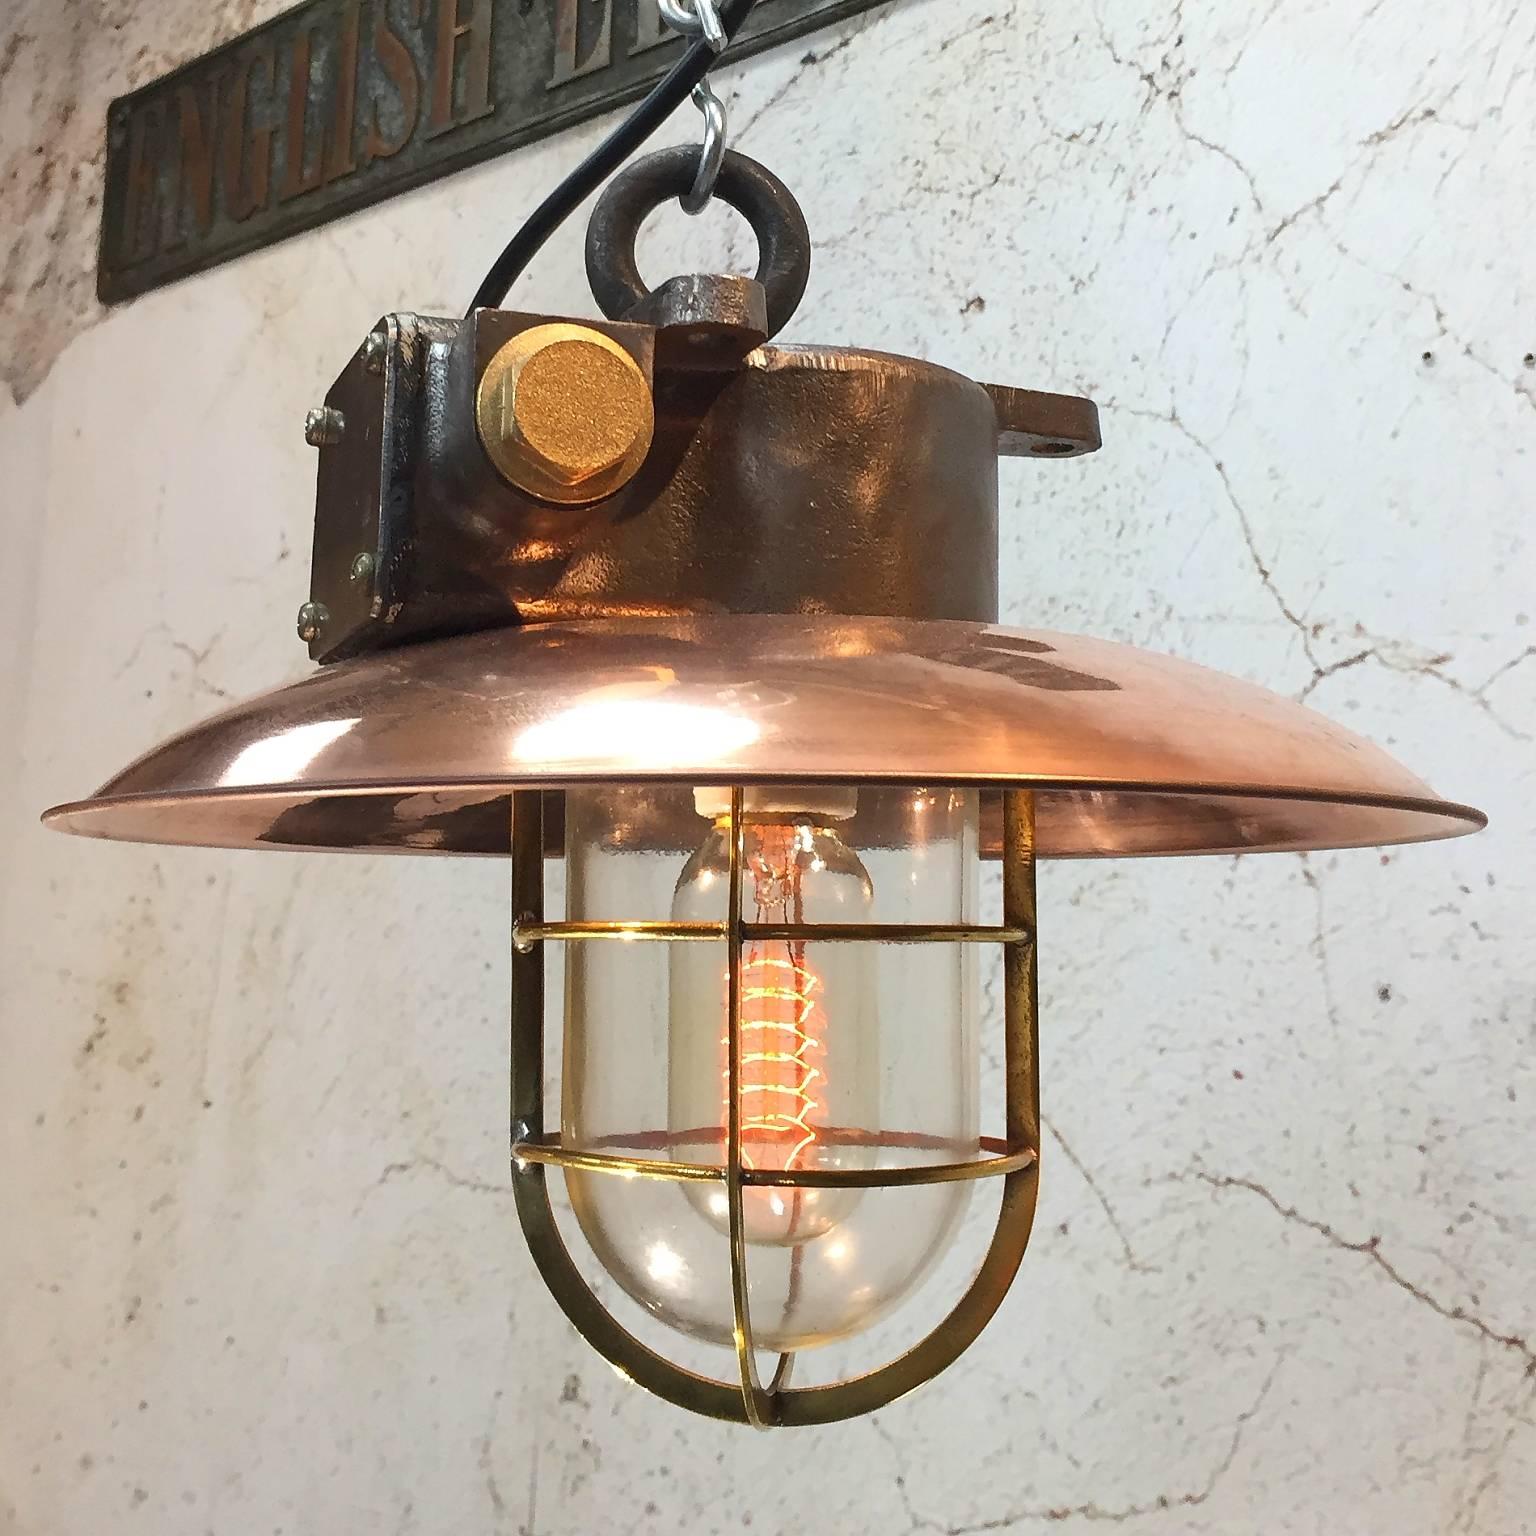 Iron explosion proof pendant with 30 cm copper shade E27.

Cast iron and glass. Sold without chain and S-hook.

This excellent example of an original explosion proof lamp which was salvaged from an old German ship. The date is circa 1975, it has